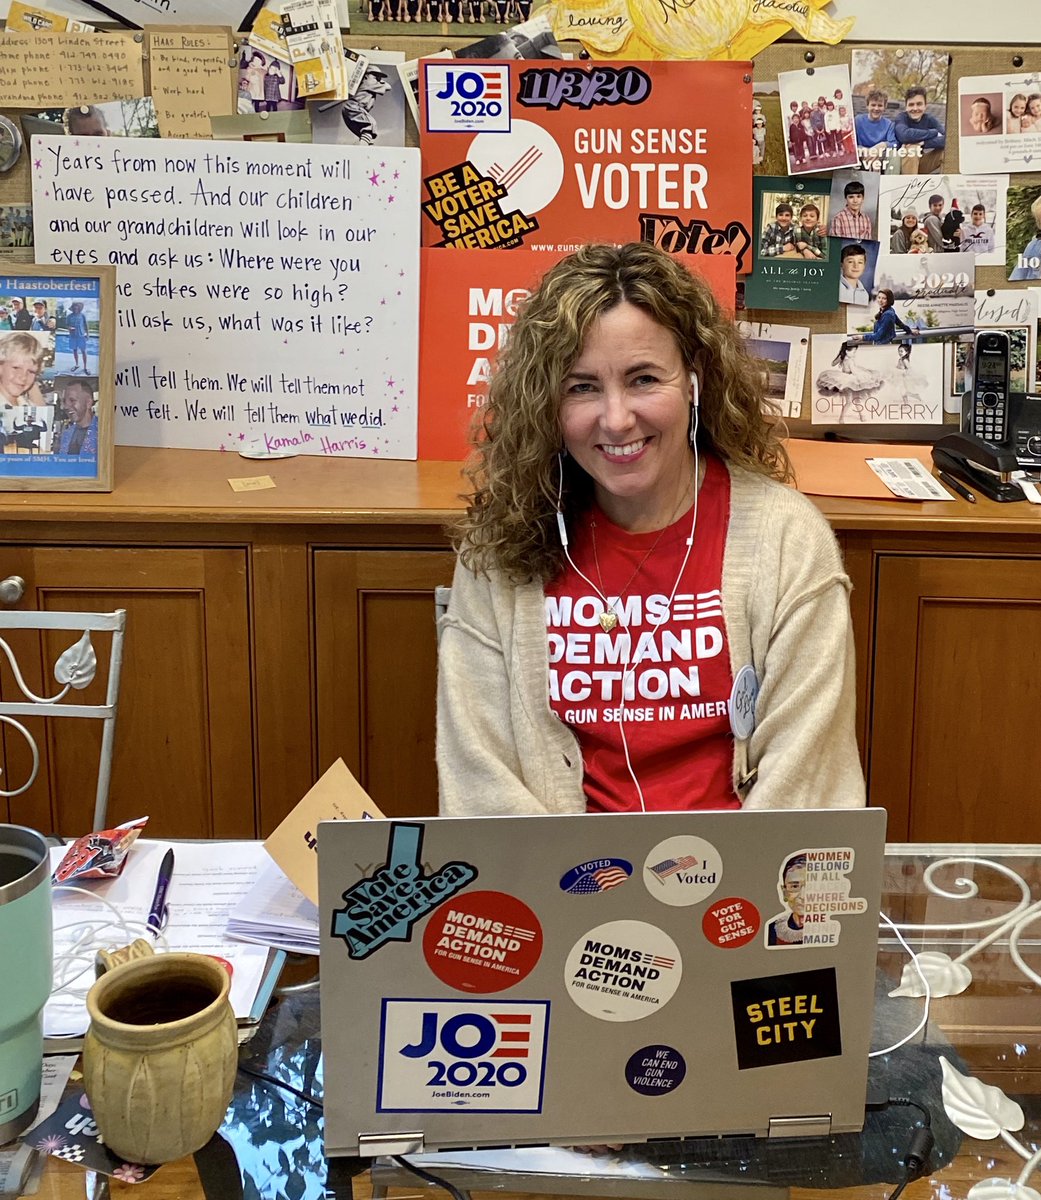 Preparing to spend the next 11 hours on Zoom with my @MomsDemand friends. We’ll be inspired by @TVietor08 and @TheScottCharles and make GOTV calls for PA GSCs @MicheleKnoll44 @LissaforPA @pamforpa @ConorLambPA @EmilySkopovPA & @JoeBiden @KamalaHarris #MomsAreEverywhere #paleg